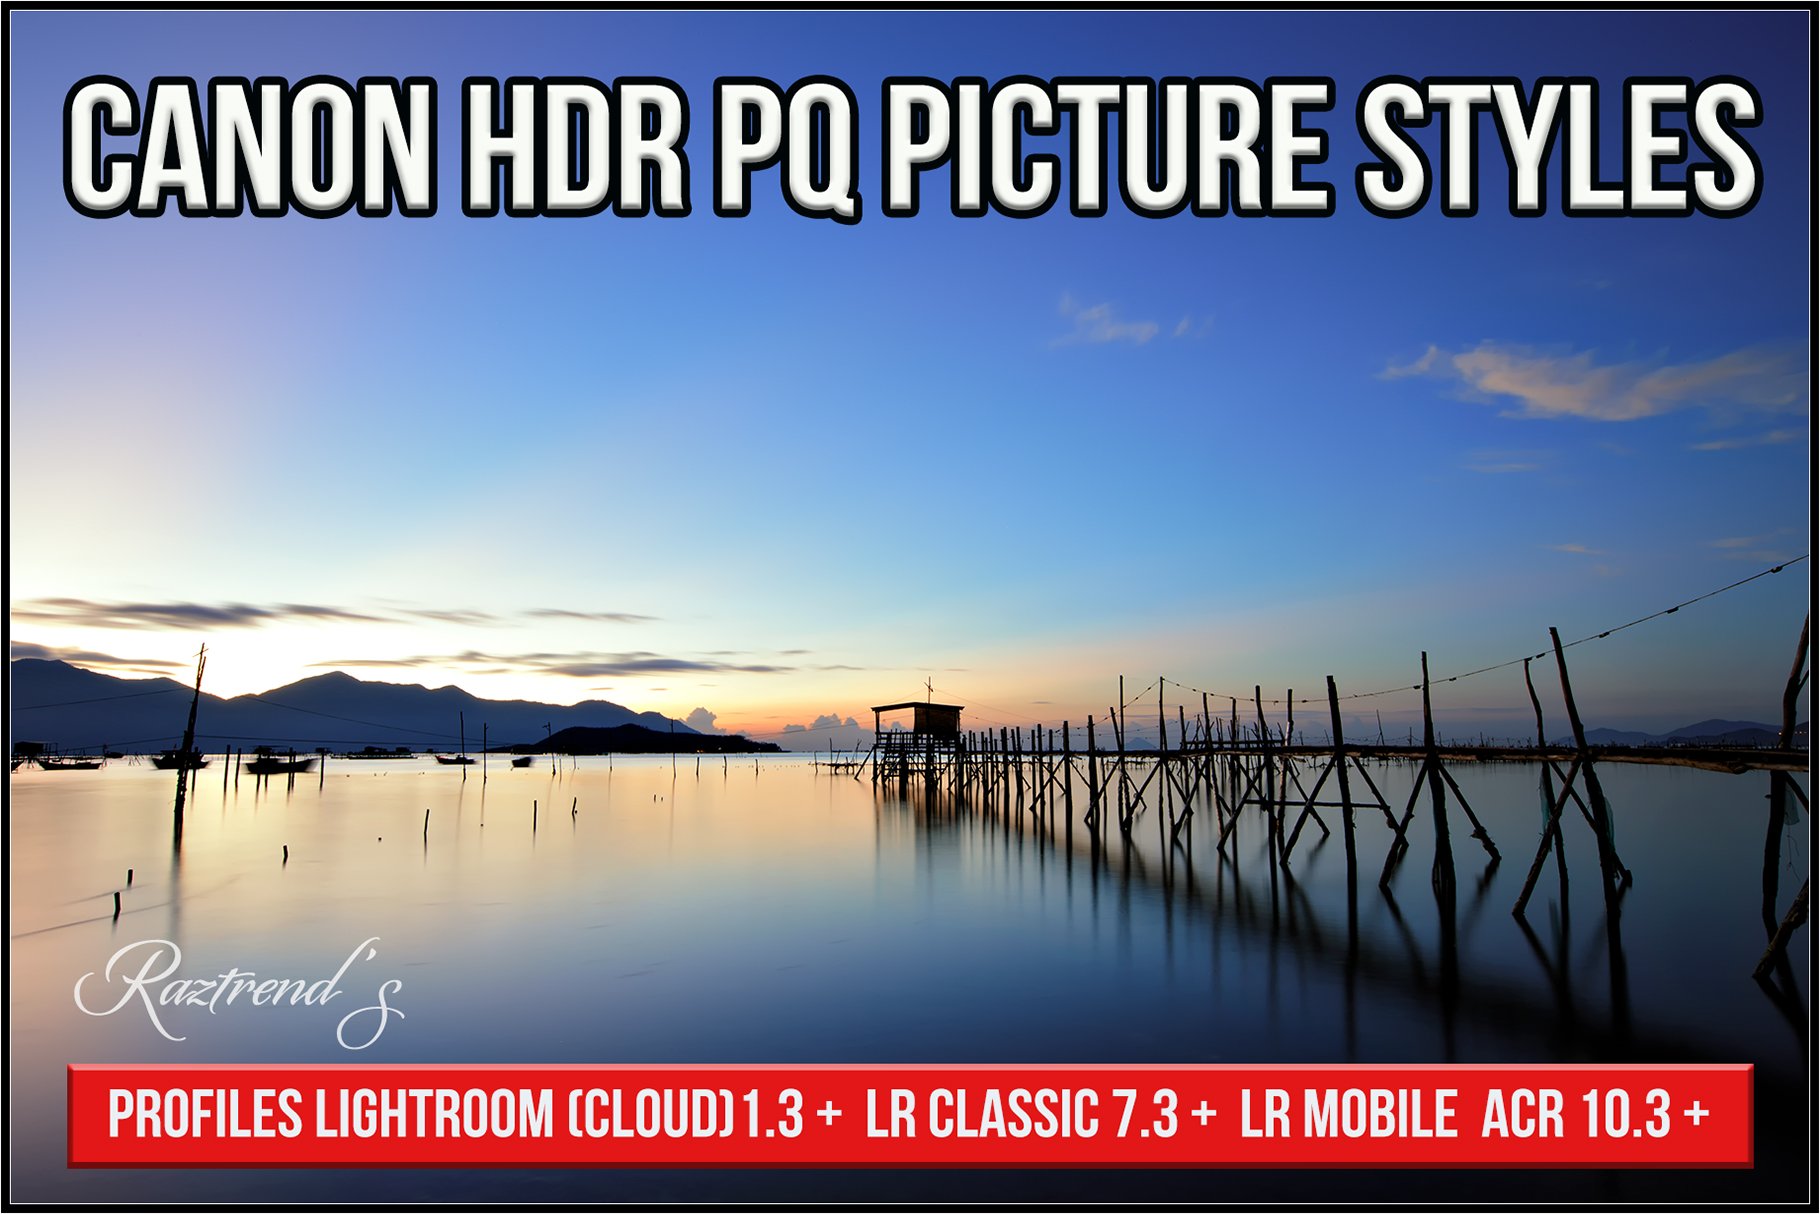 Canon HDR PQ Picture Stylescover image.